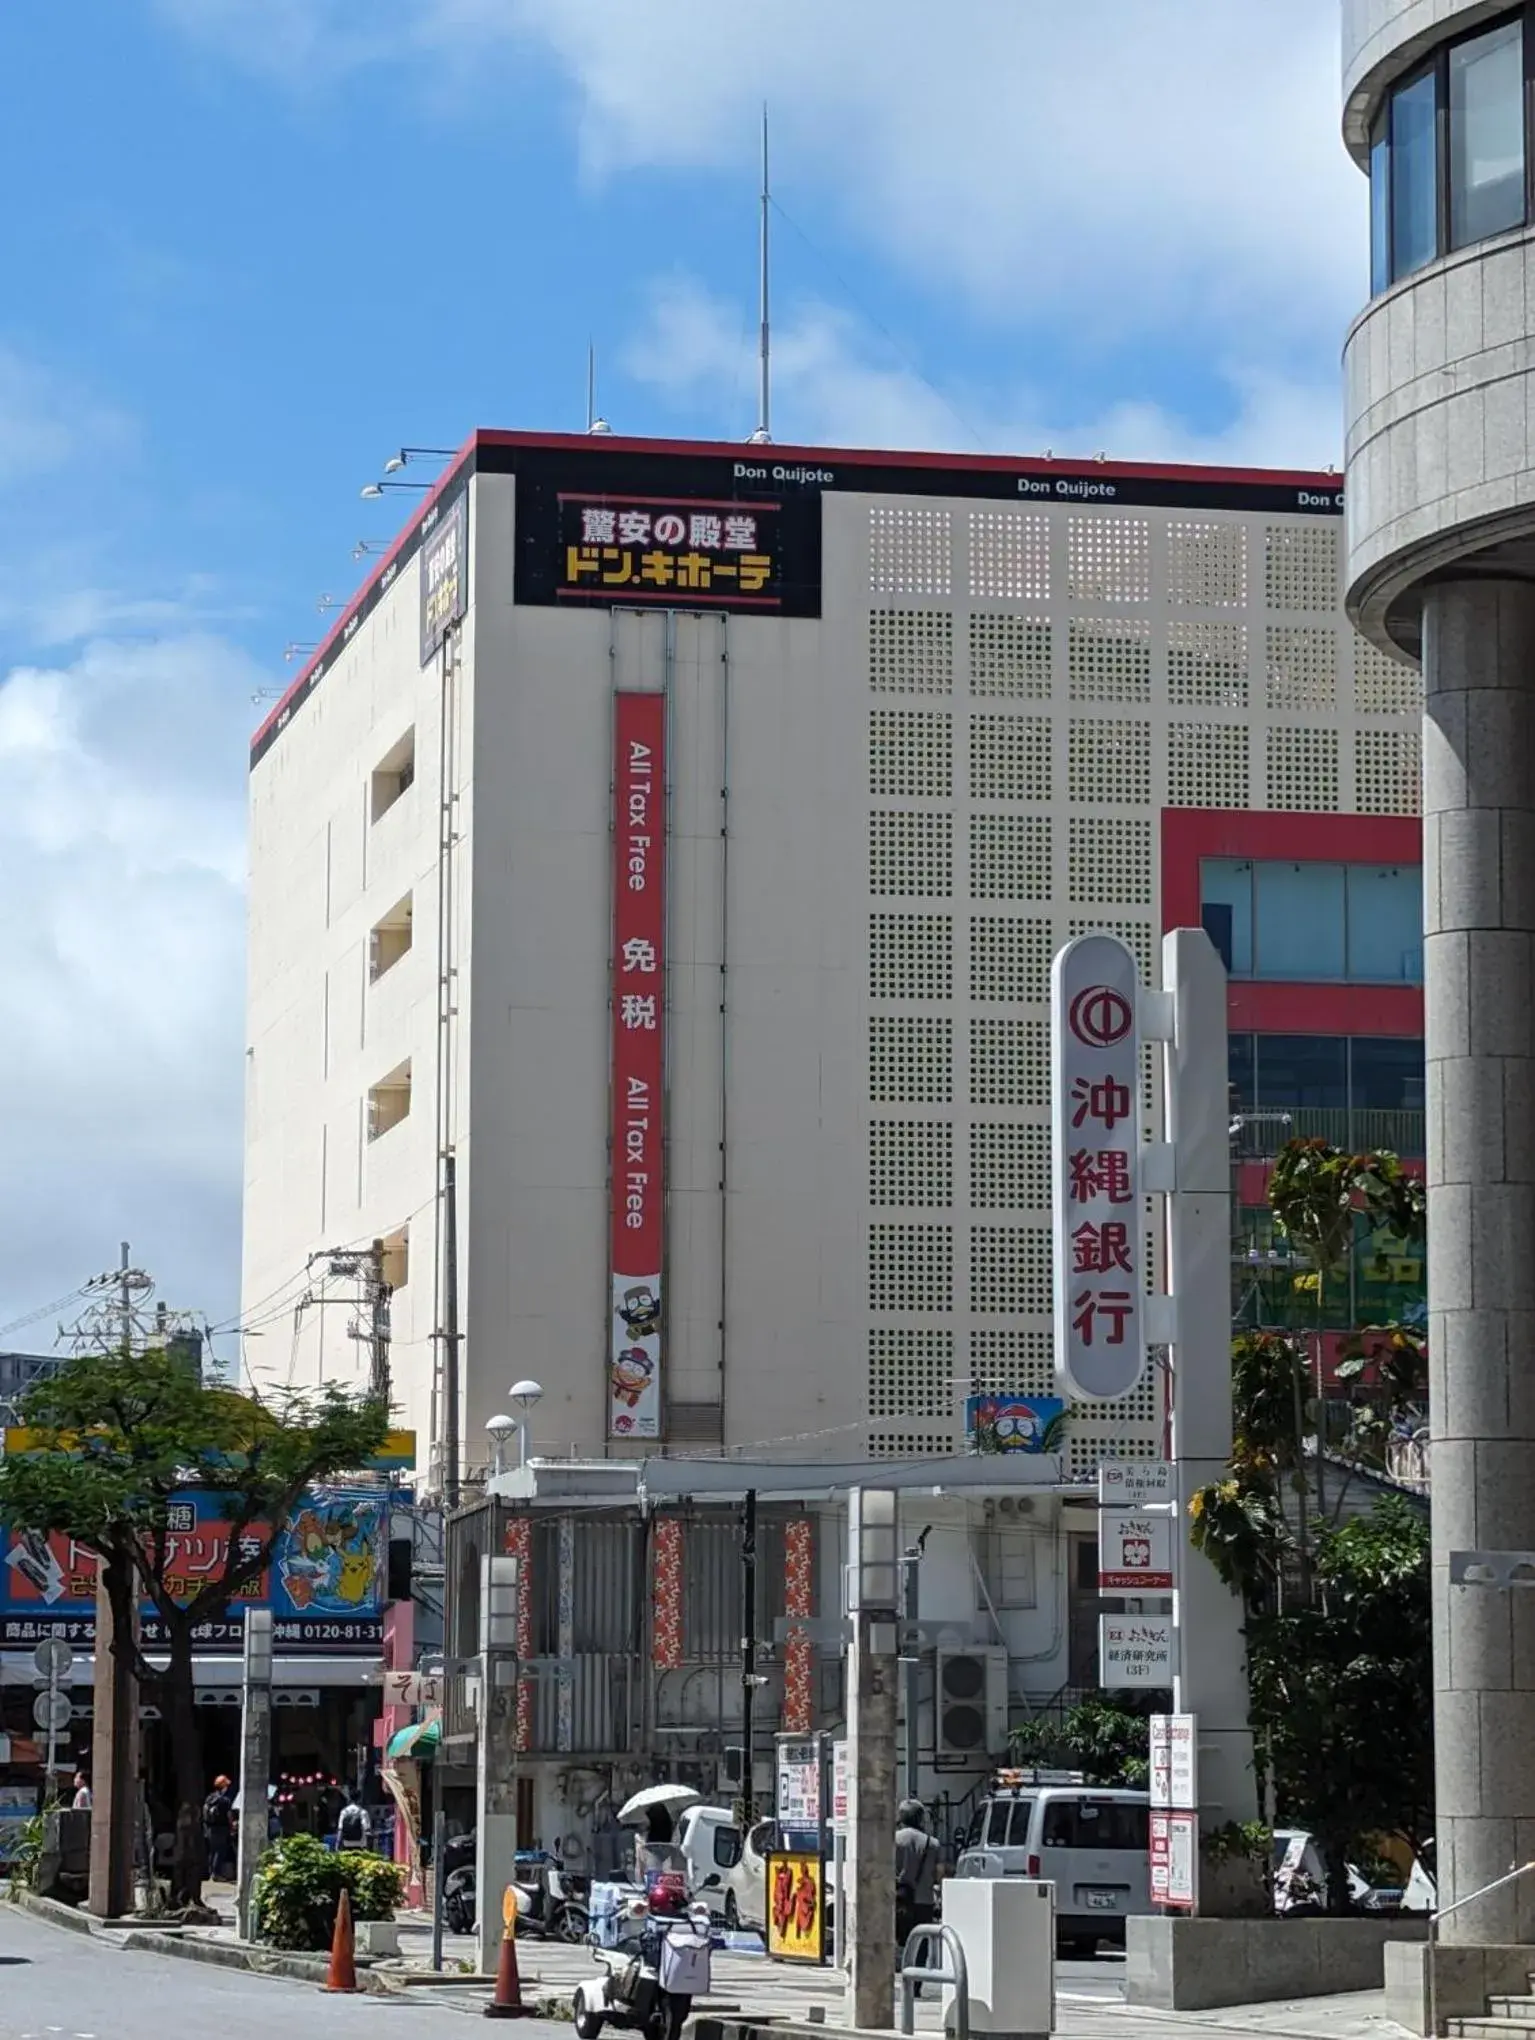 Off site, Property Building in JR Kyushu Hotel Blossom Naha